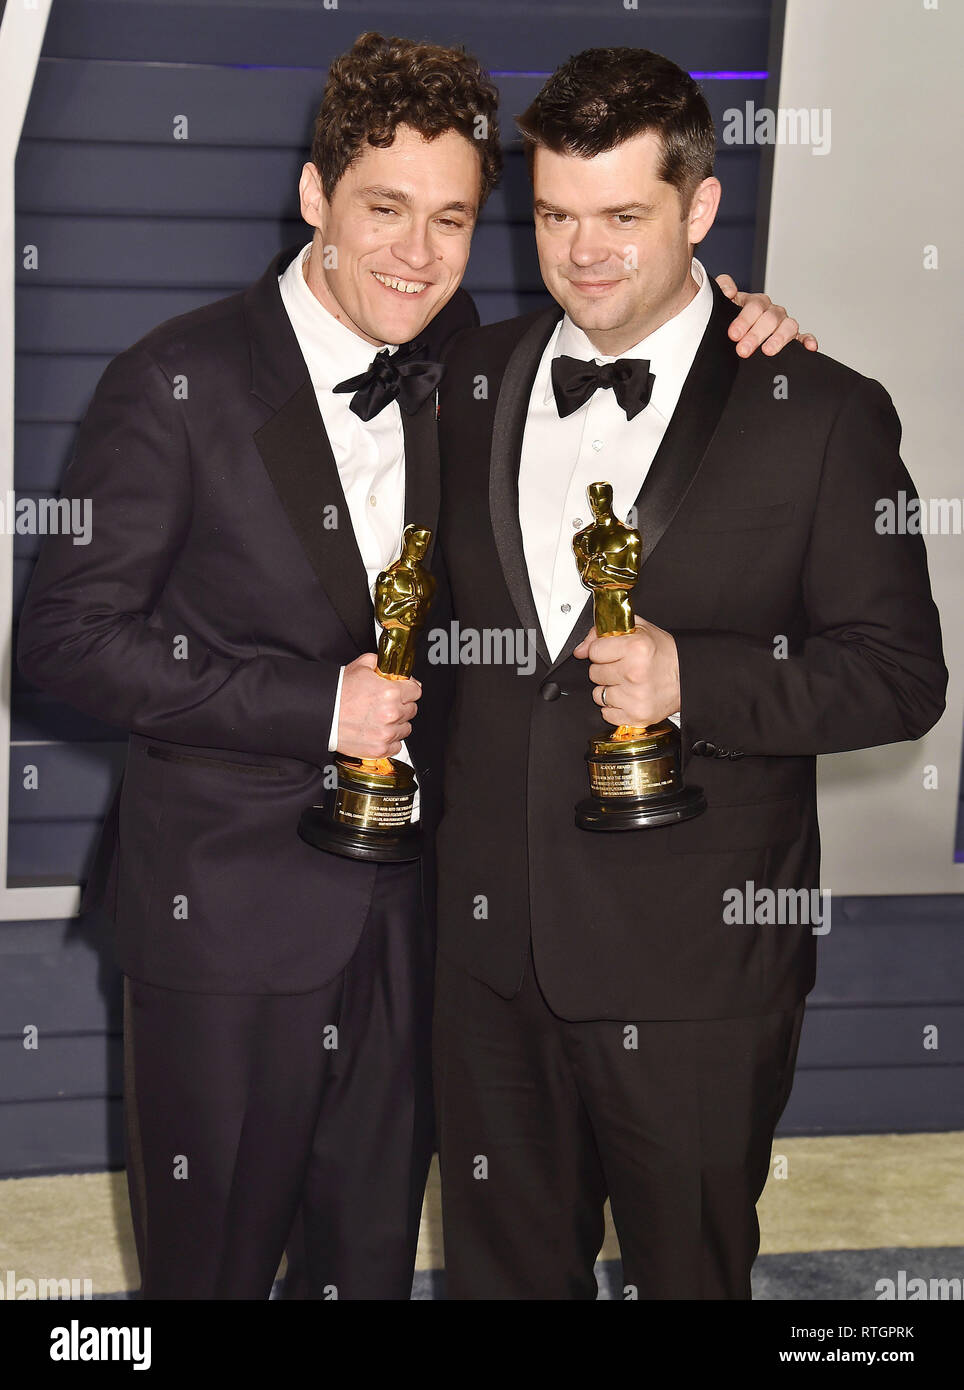 BEVERLY HILLS, CA - FEBRUARY 25: Best Animated Feature Film winners for 'Spider-Man: Into the Spider-Verse' (L-R) Phil Lord and Christopher Miller att Stock Photo